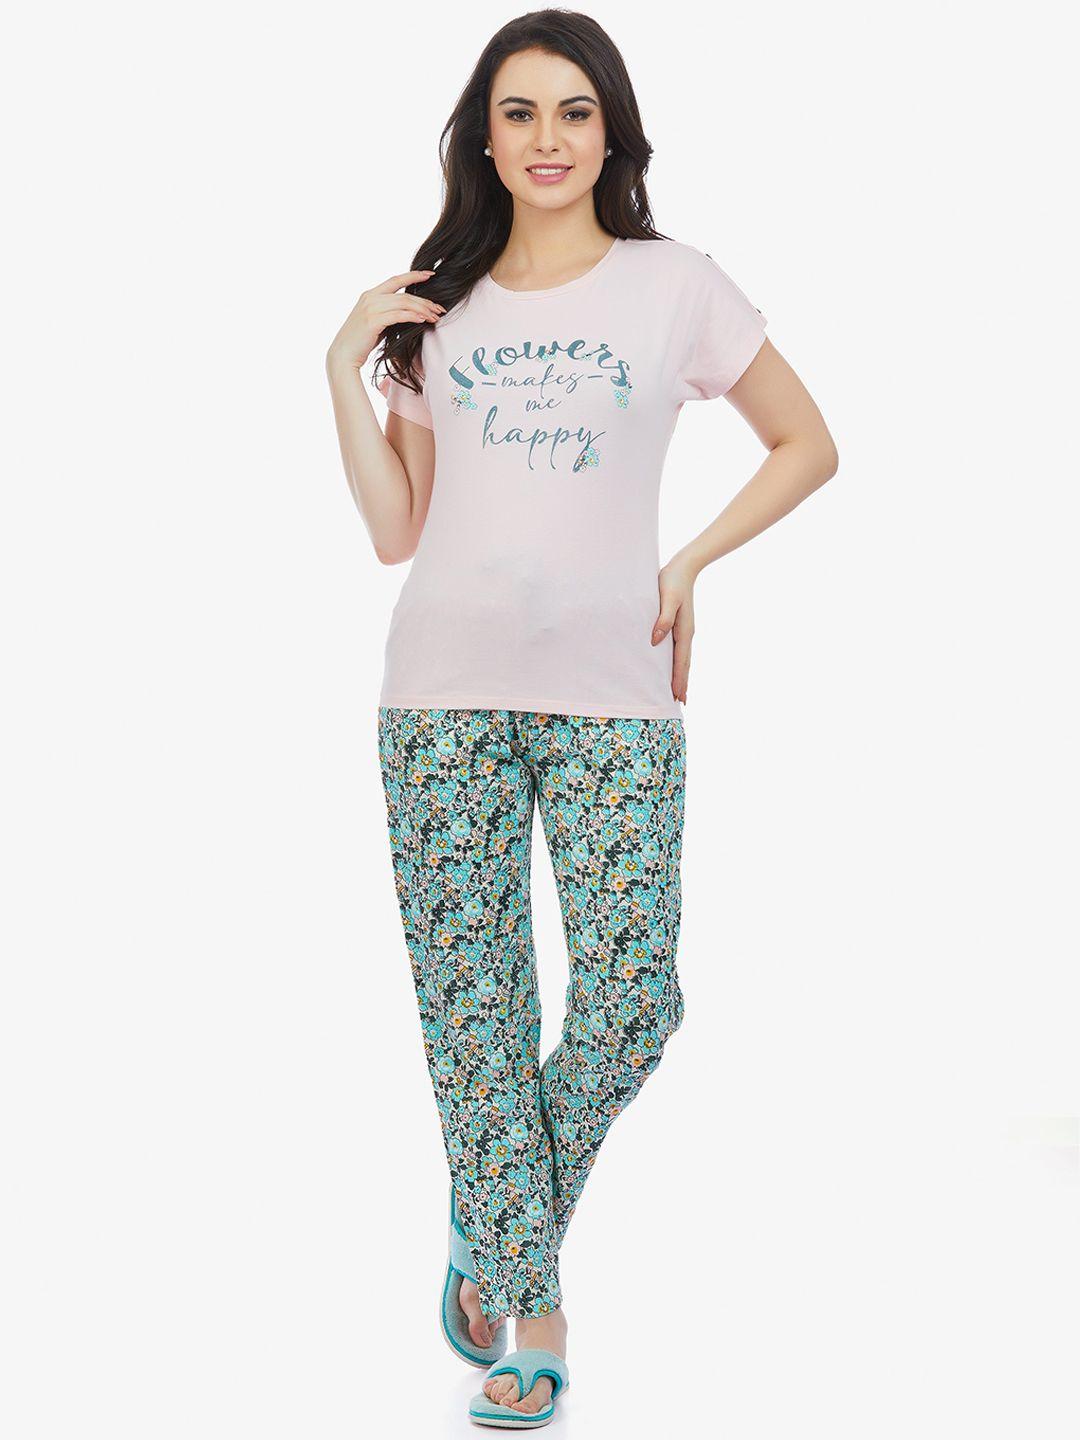 maysixty floral printed night suit